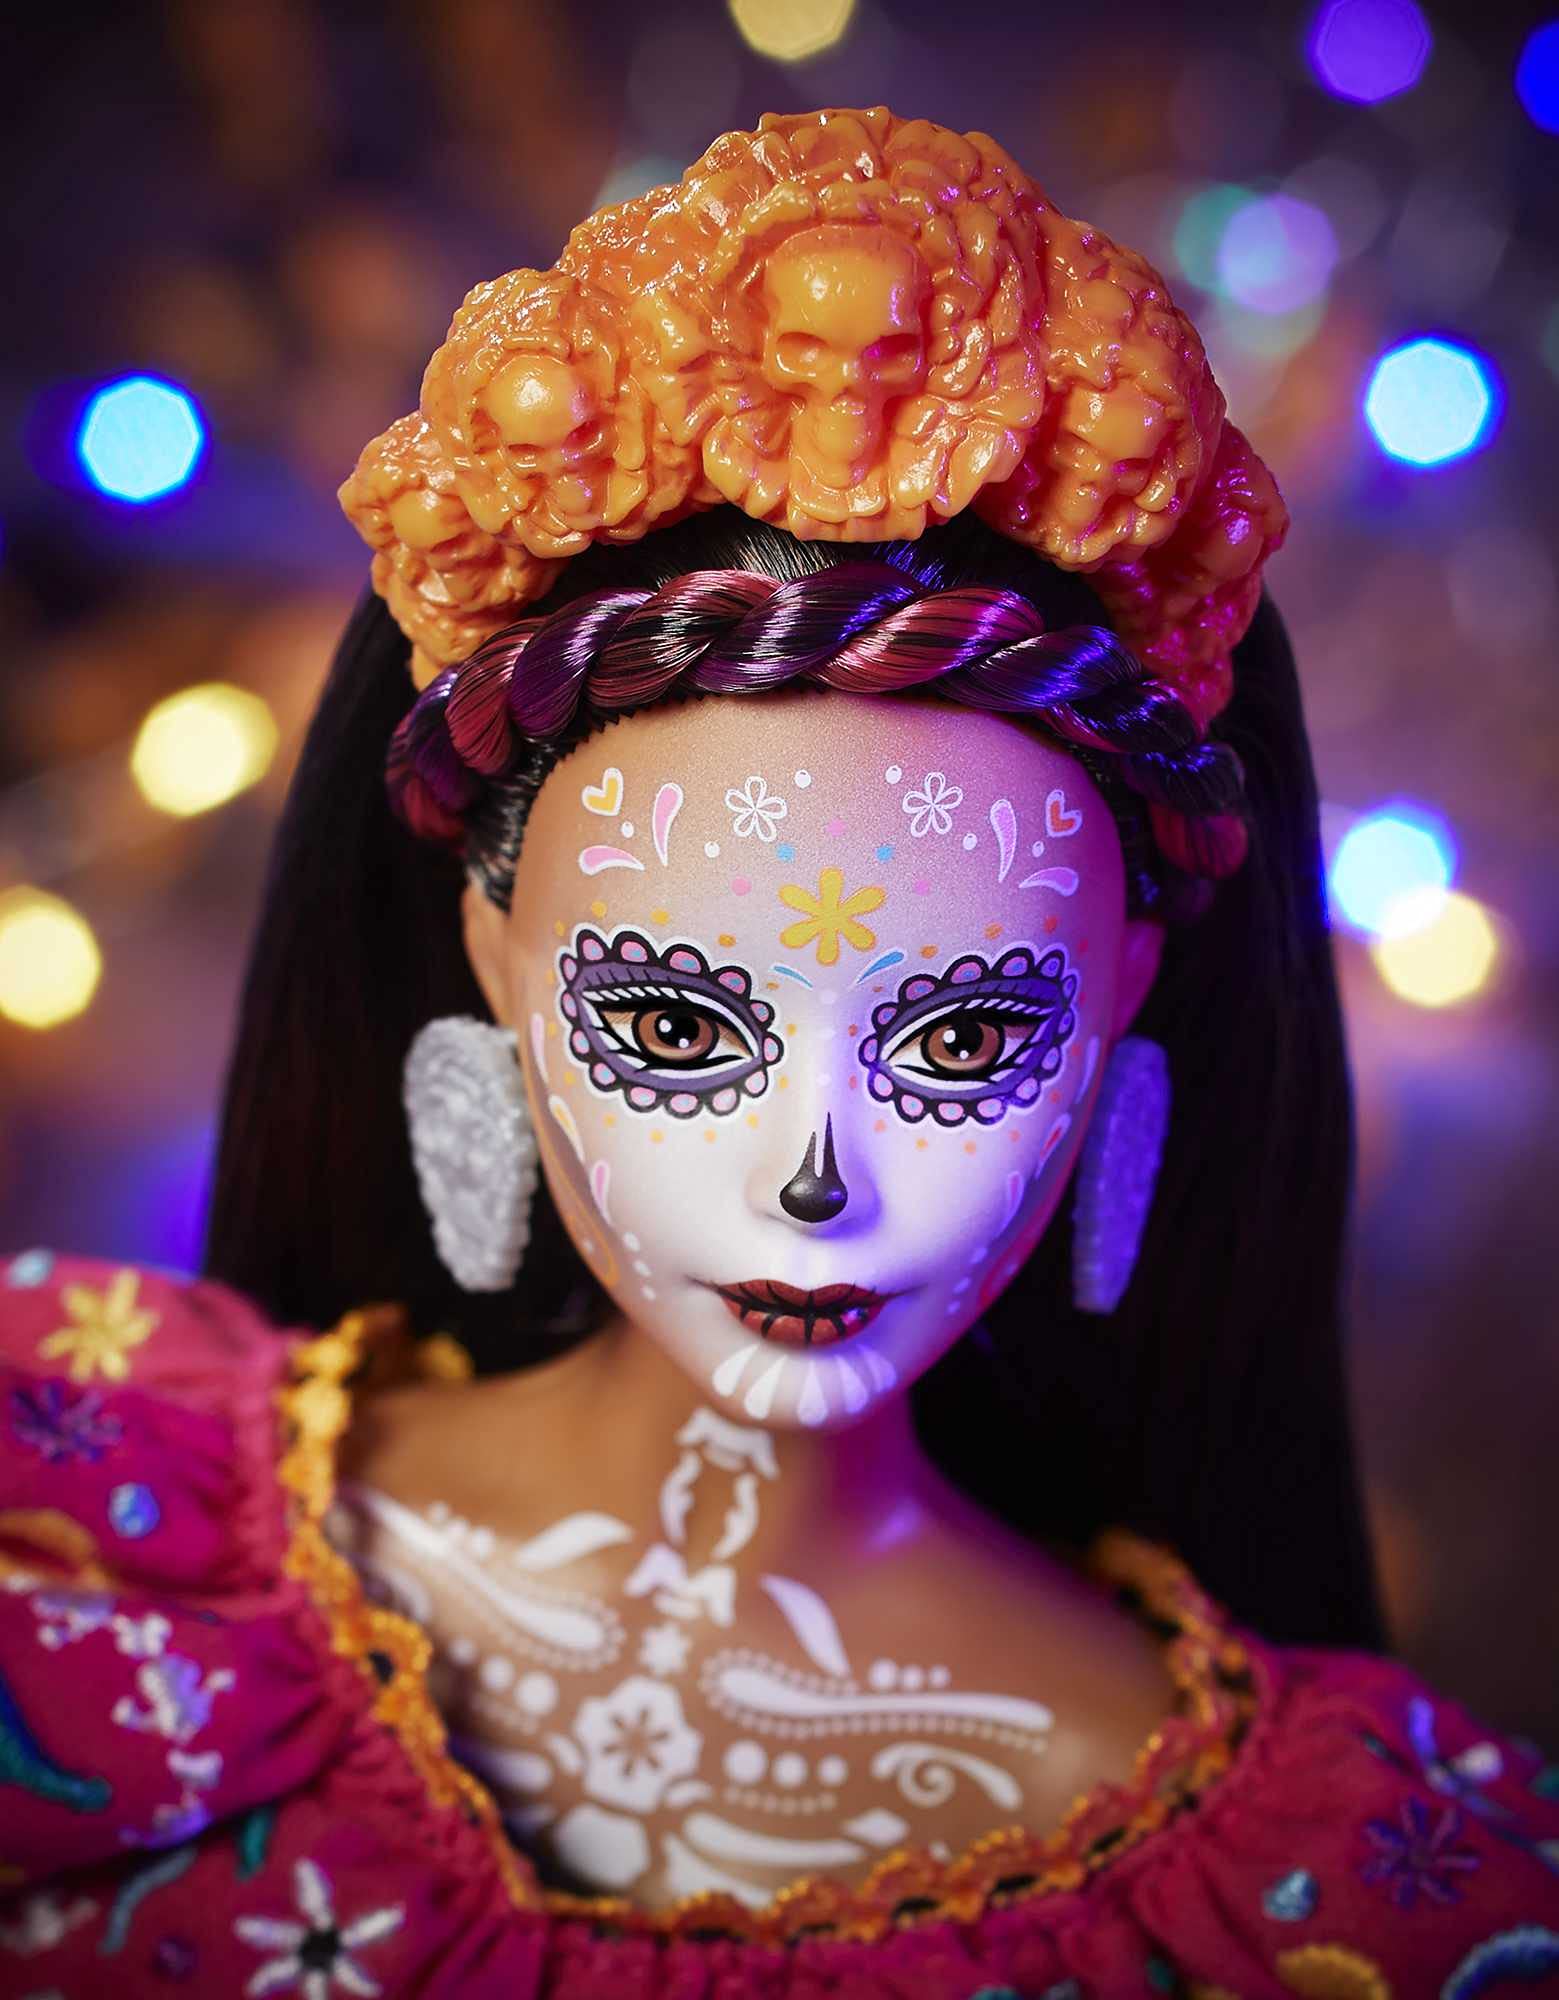 Barbie 2021 Dia De Muertos Doll (11.5-in) Wearing Traditional Embroidered Dress, Flower Crown & Calavera Face Paint, Gift for Collectors